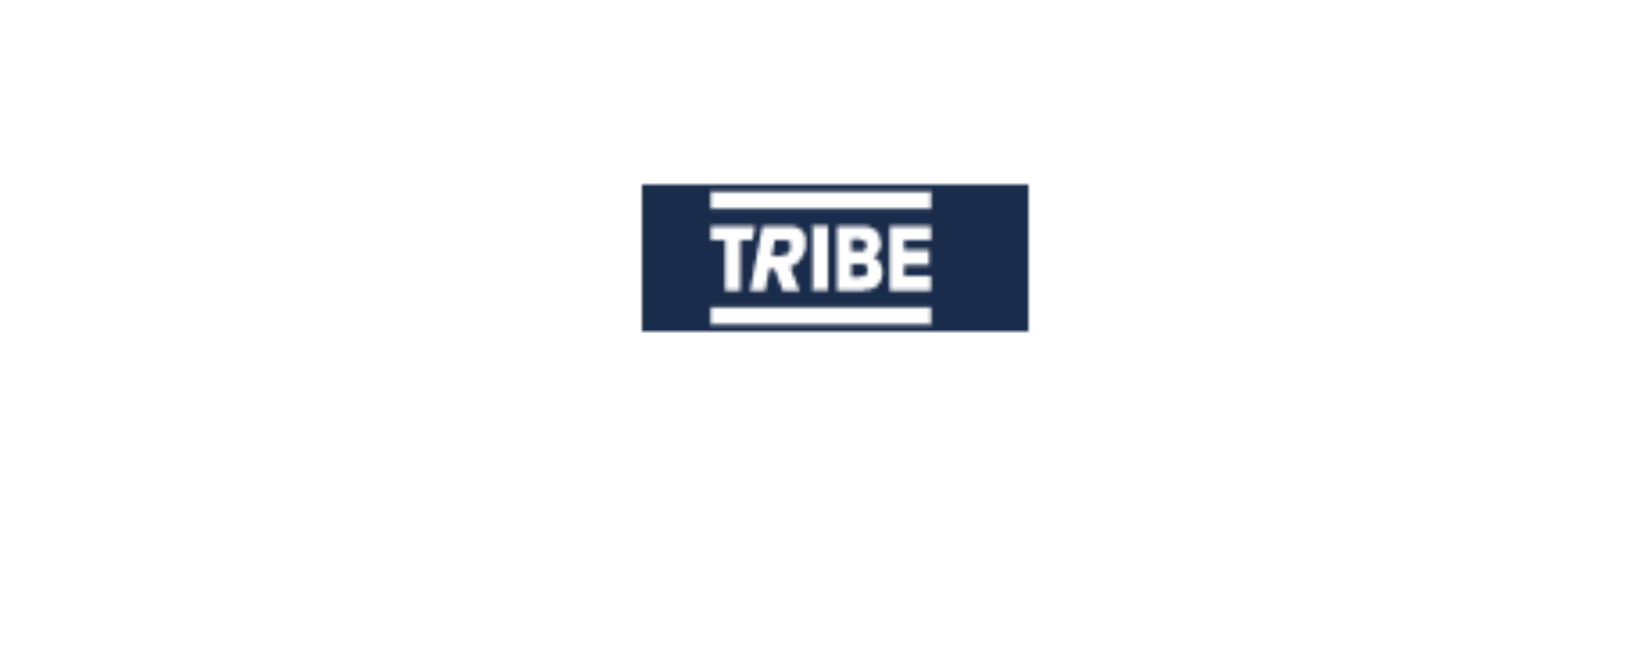 TRIBE Discount Code 2022